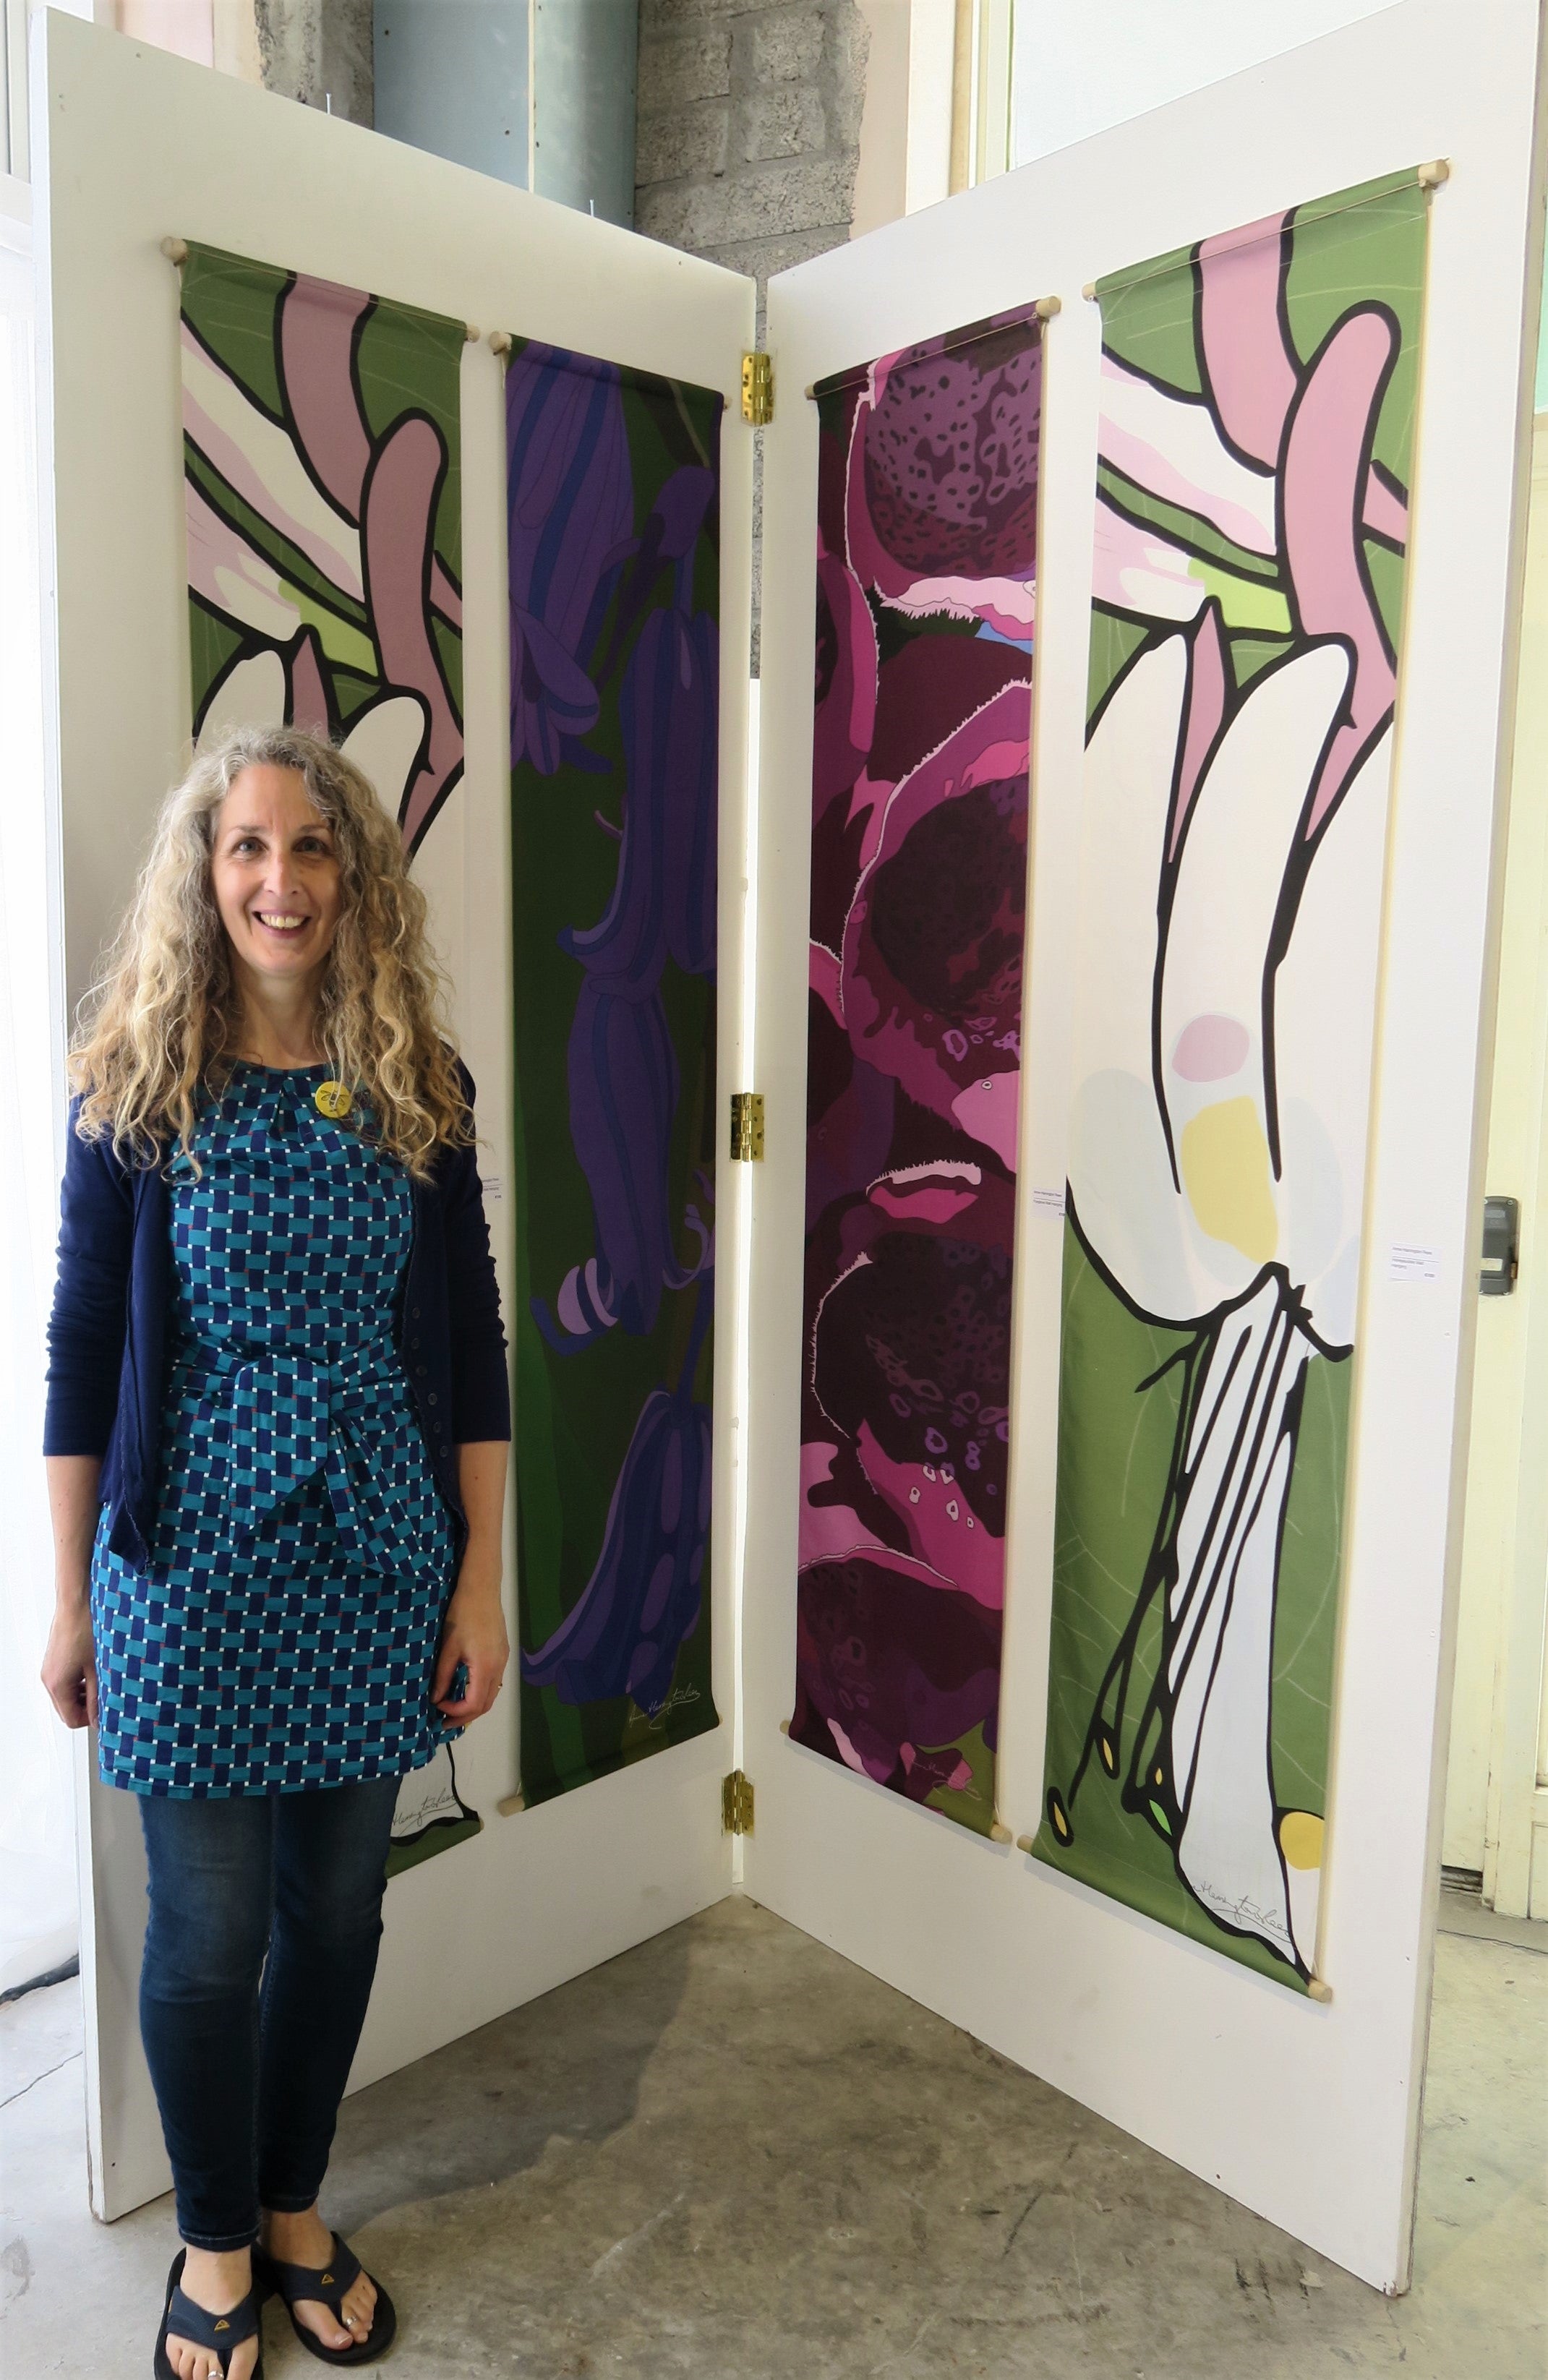 Anne Harrington Rees in front of Honeysuckle, Bluebell and Foxglove wall hangings at the opening of West Cork Creates 'Into the Woods', Skibbereen, August 2019